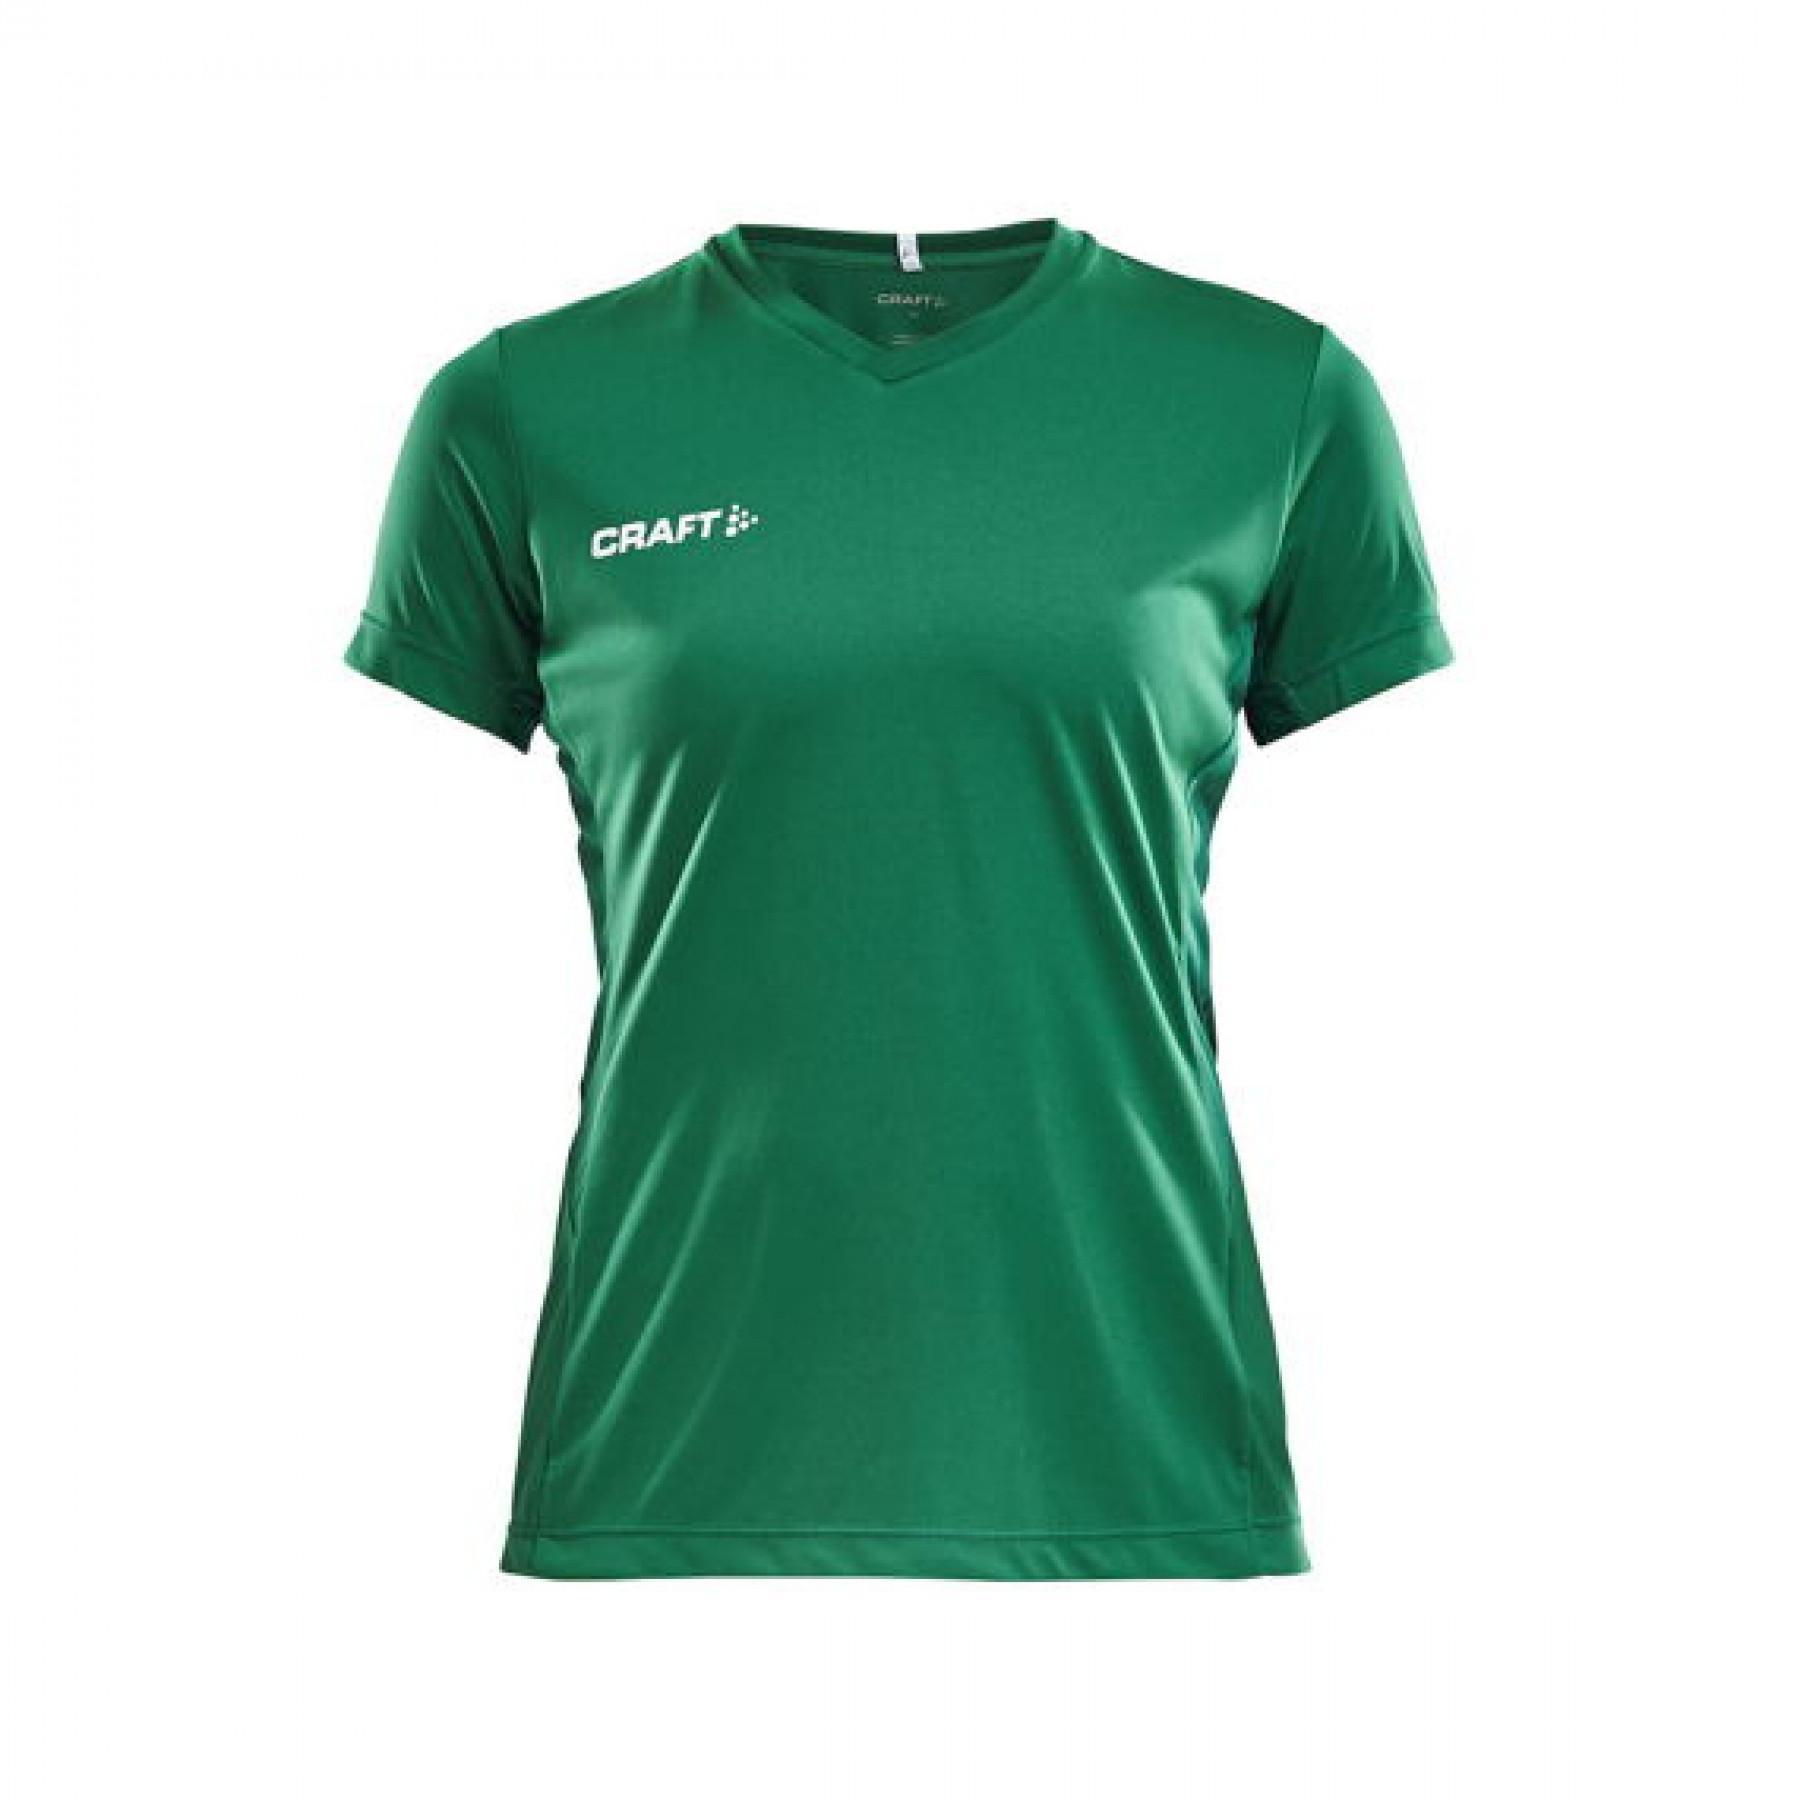 Women's jersey Craft squad solid